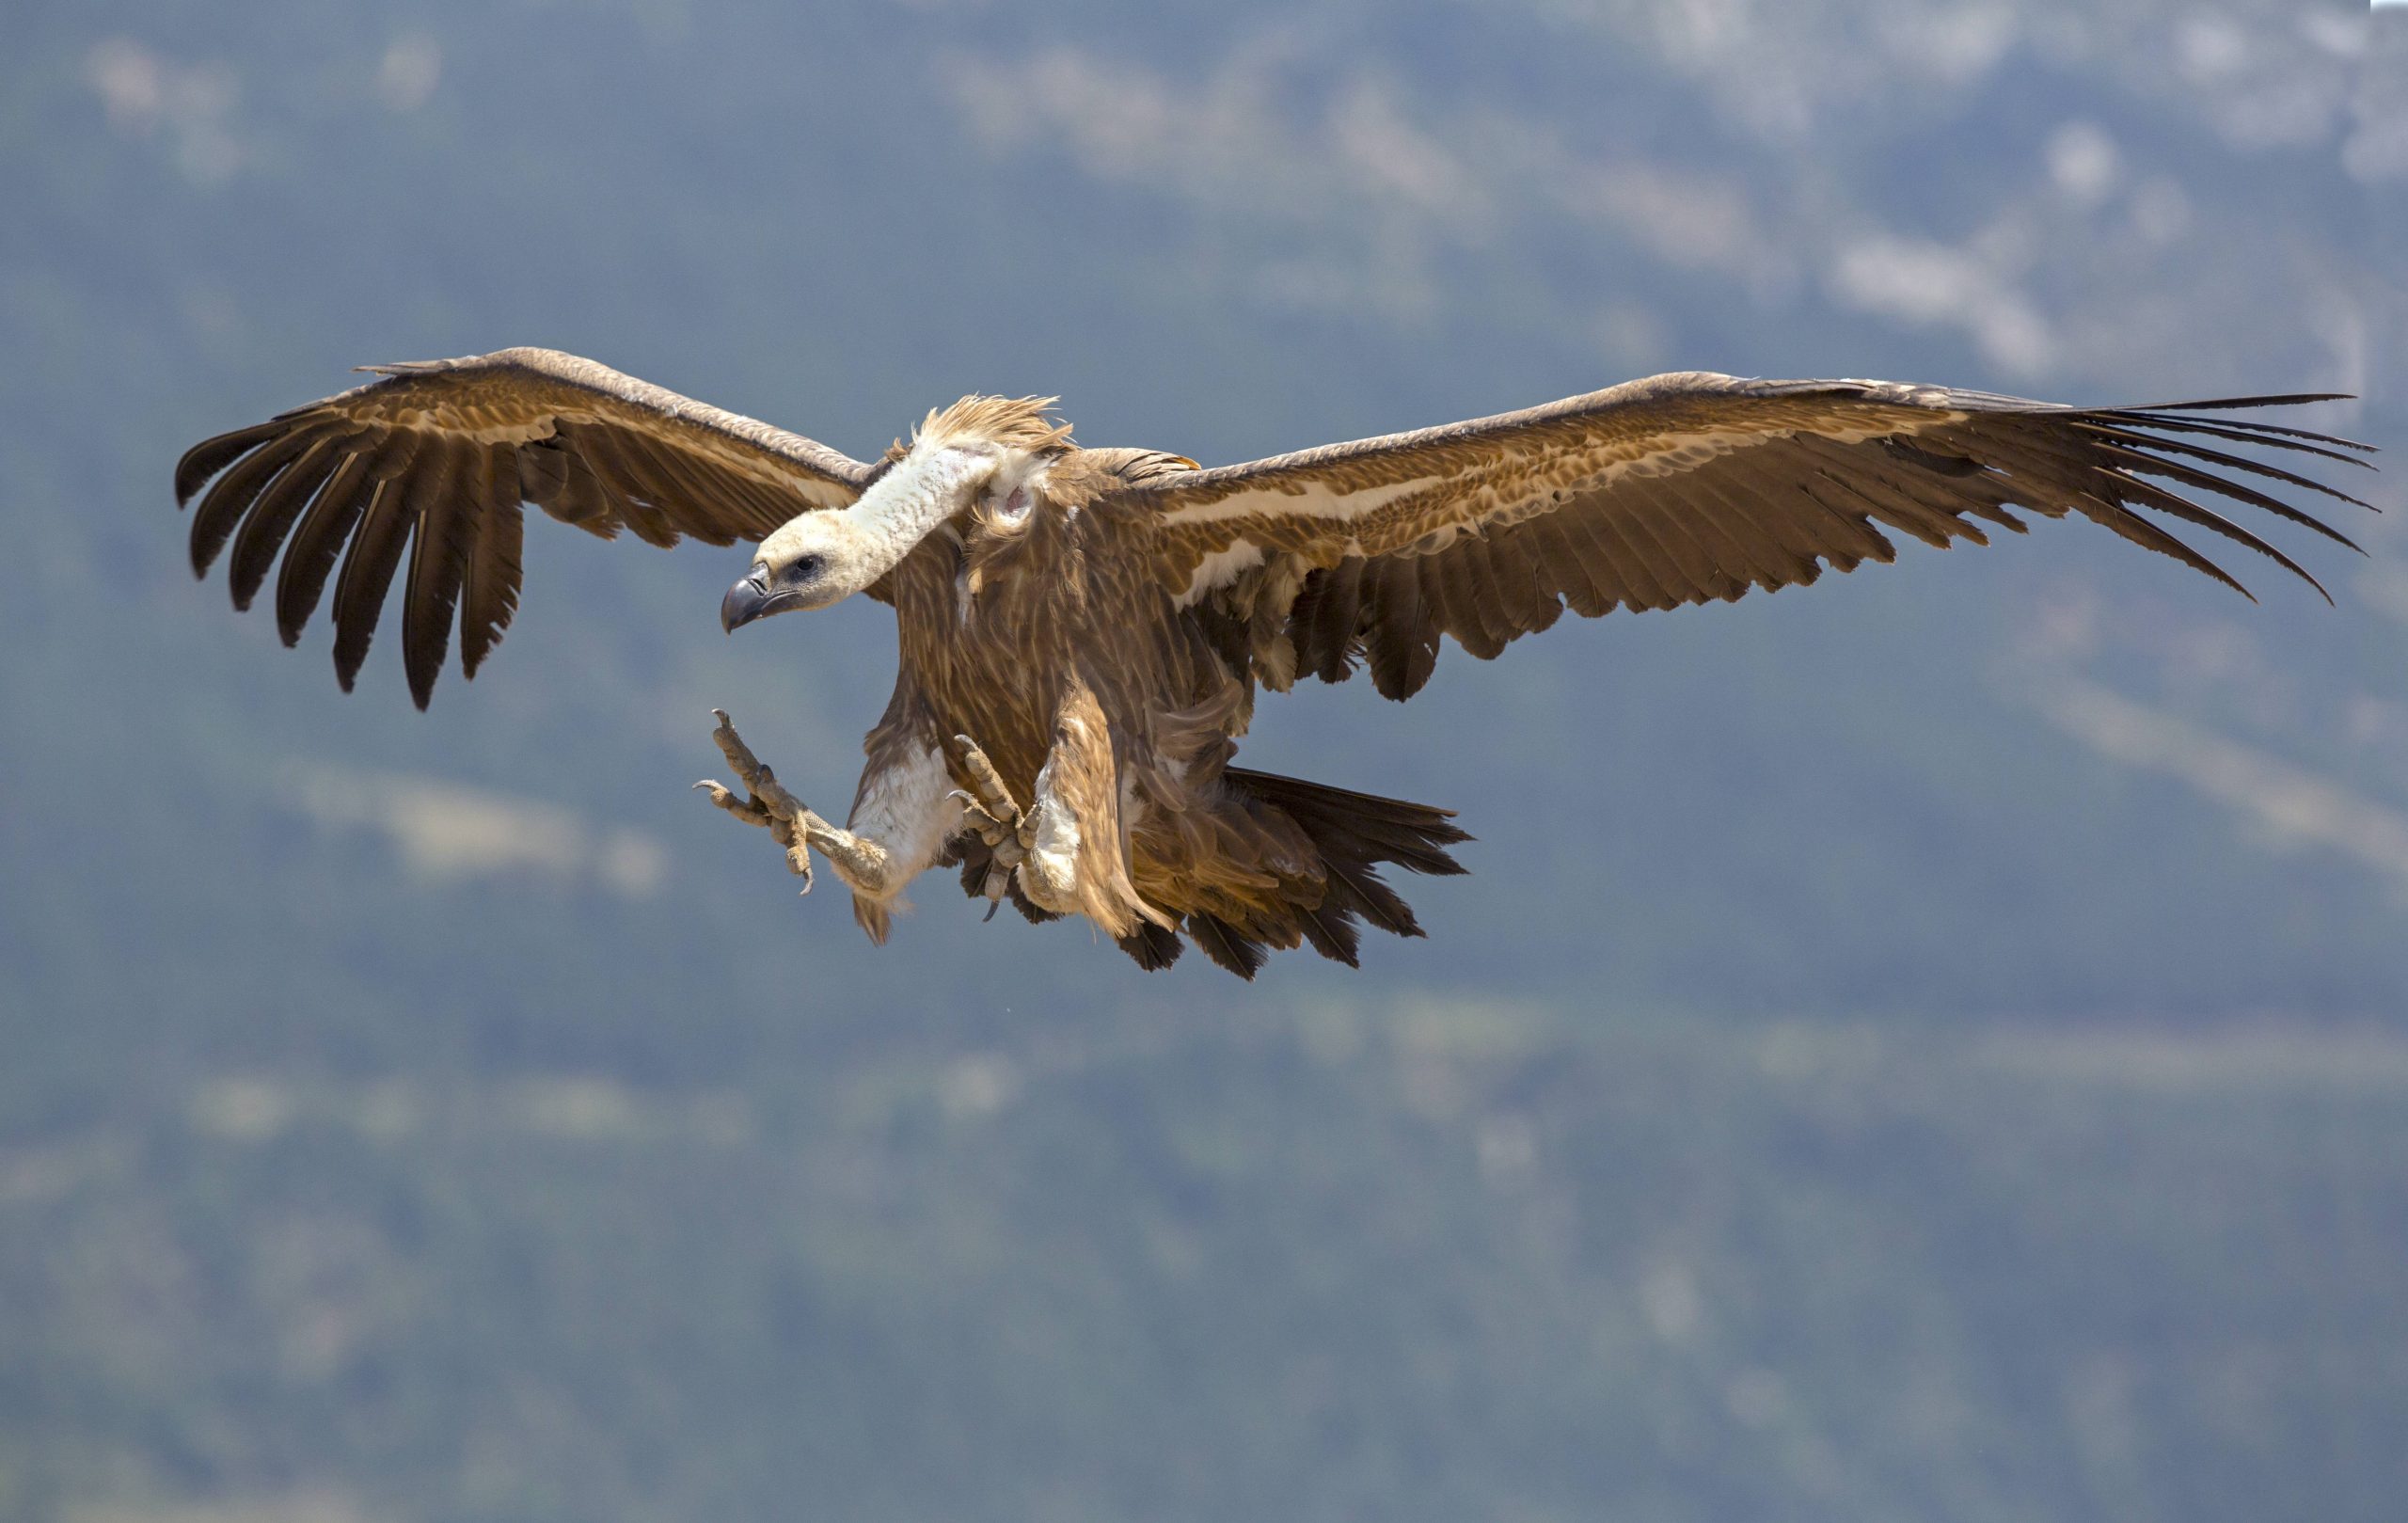 Power firm Iberdrola fined €68,000 after griffon vulture is electrocuted in Spain's Valencia